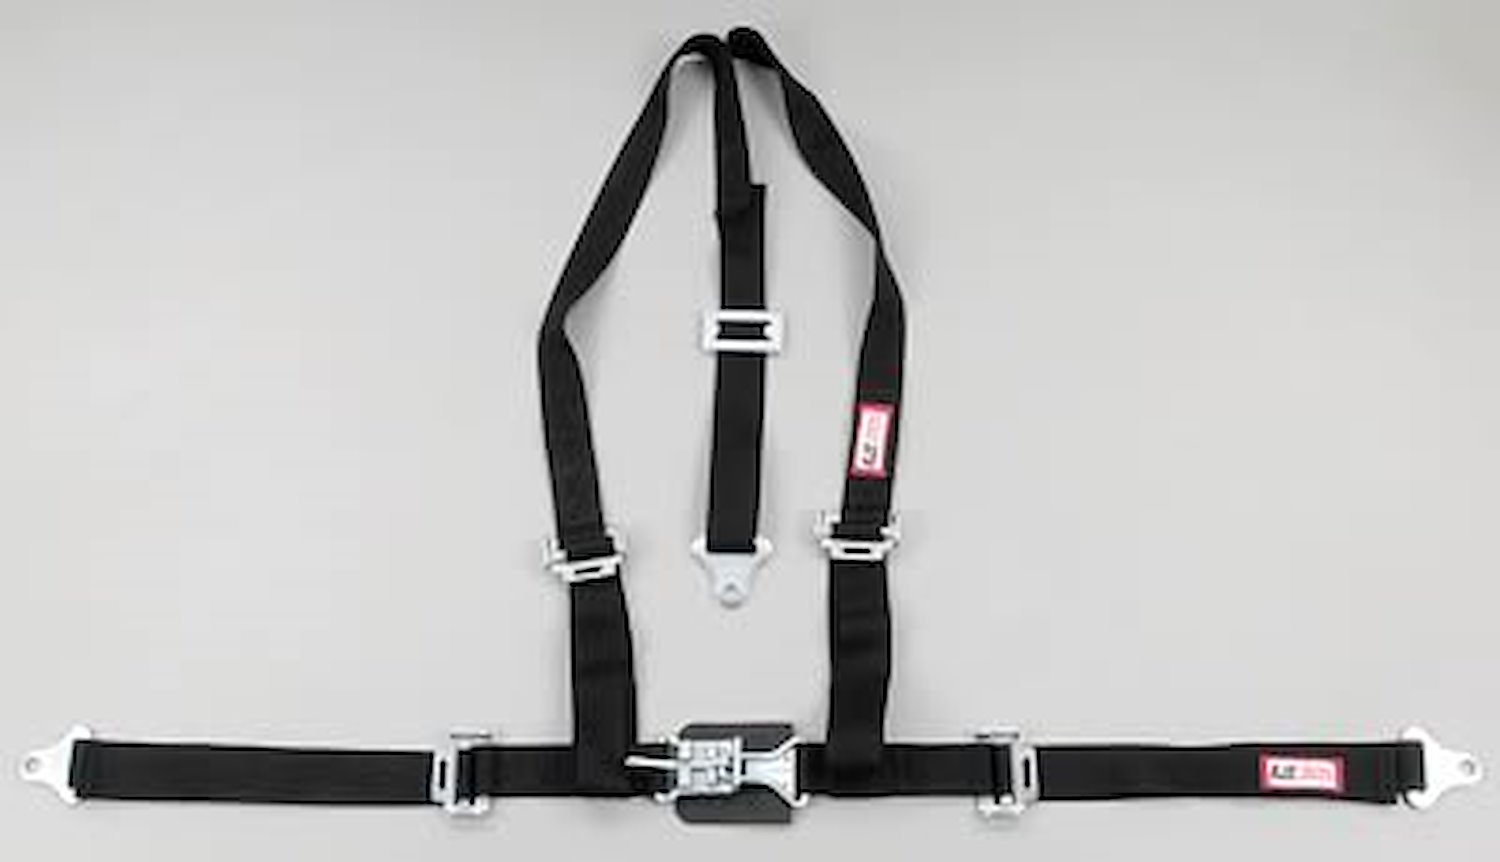 NON-SFI L&L HARNESS 2 PULL DOWN Lap Belt SEWN IN 2 S.H. INDIVIDUAL FLOOR Mount w/STERNUM STRAP ALL WRAP ENDS RED